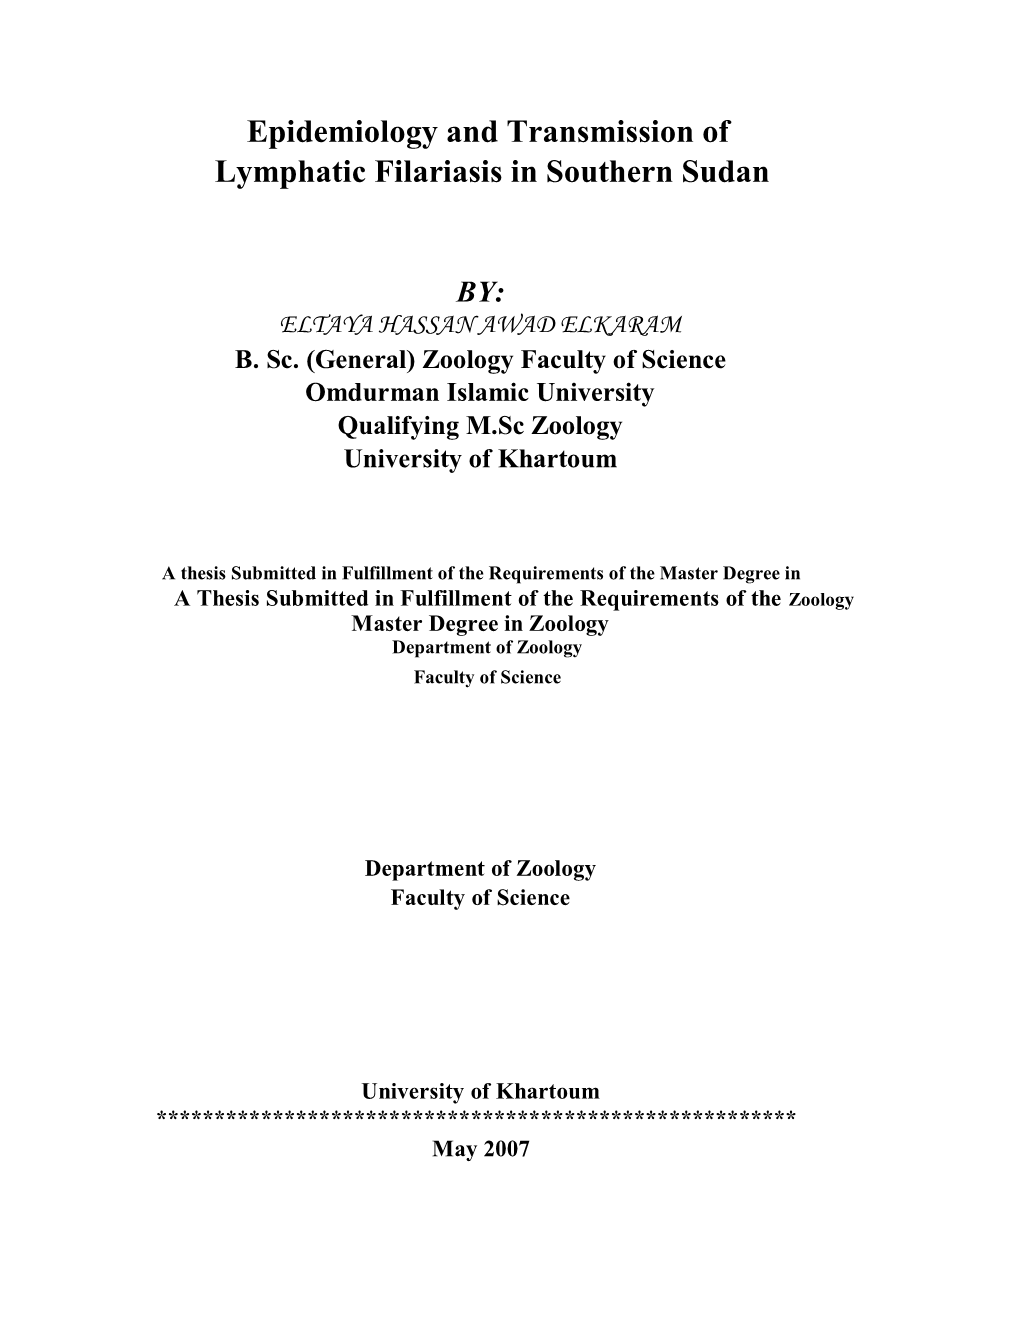 Epidemiology and Transmission of Lymphatic Filariasis in Southern Sudan